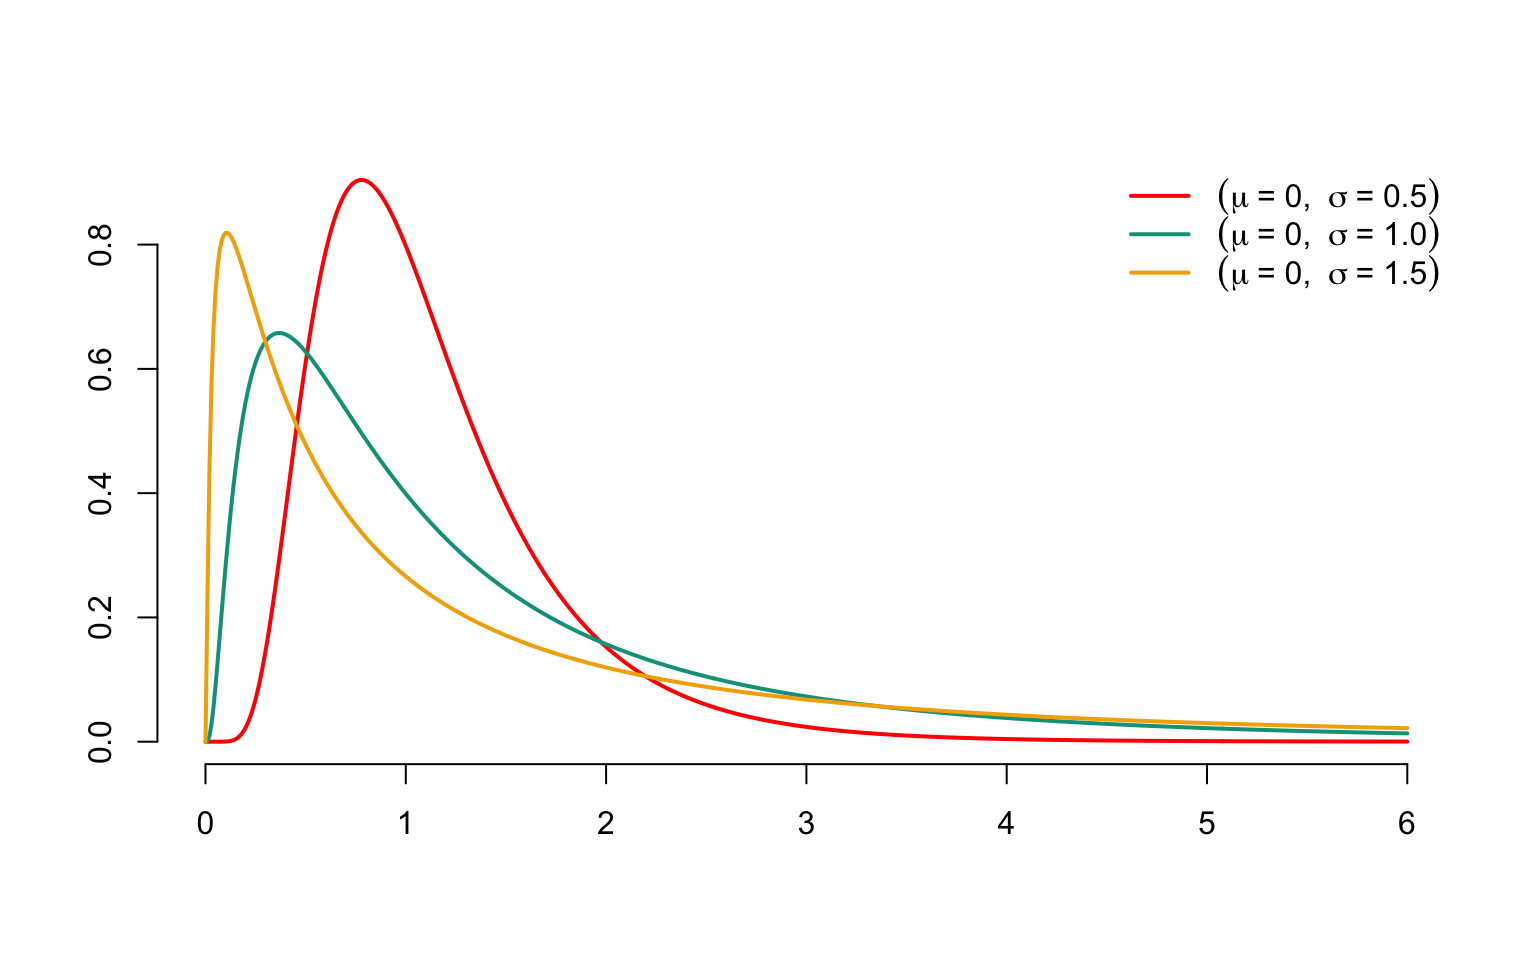 Densities of log-normal distributions with parameters $\mu=0$ and different values for $\sigma^2$.